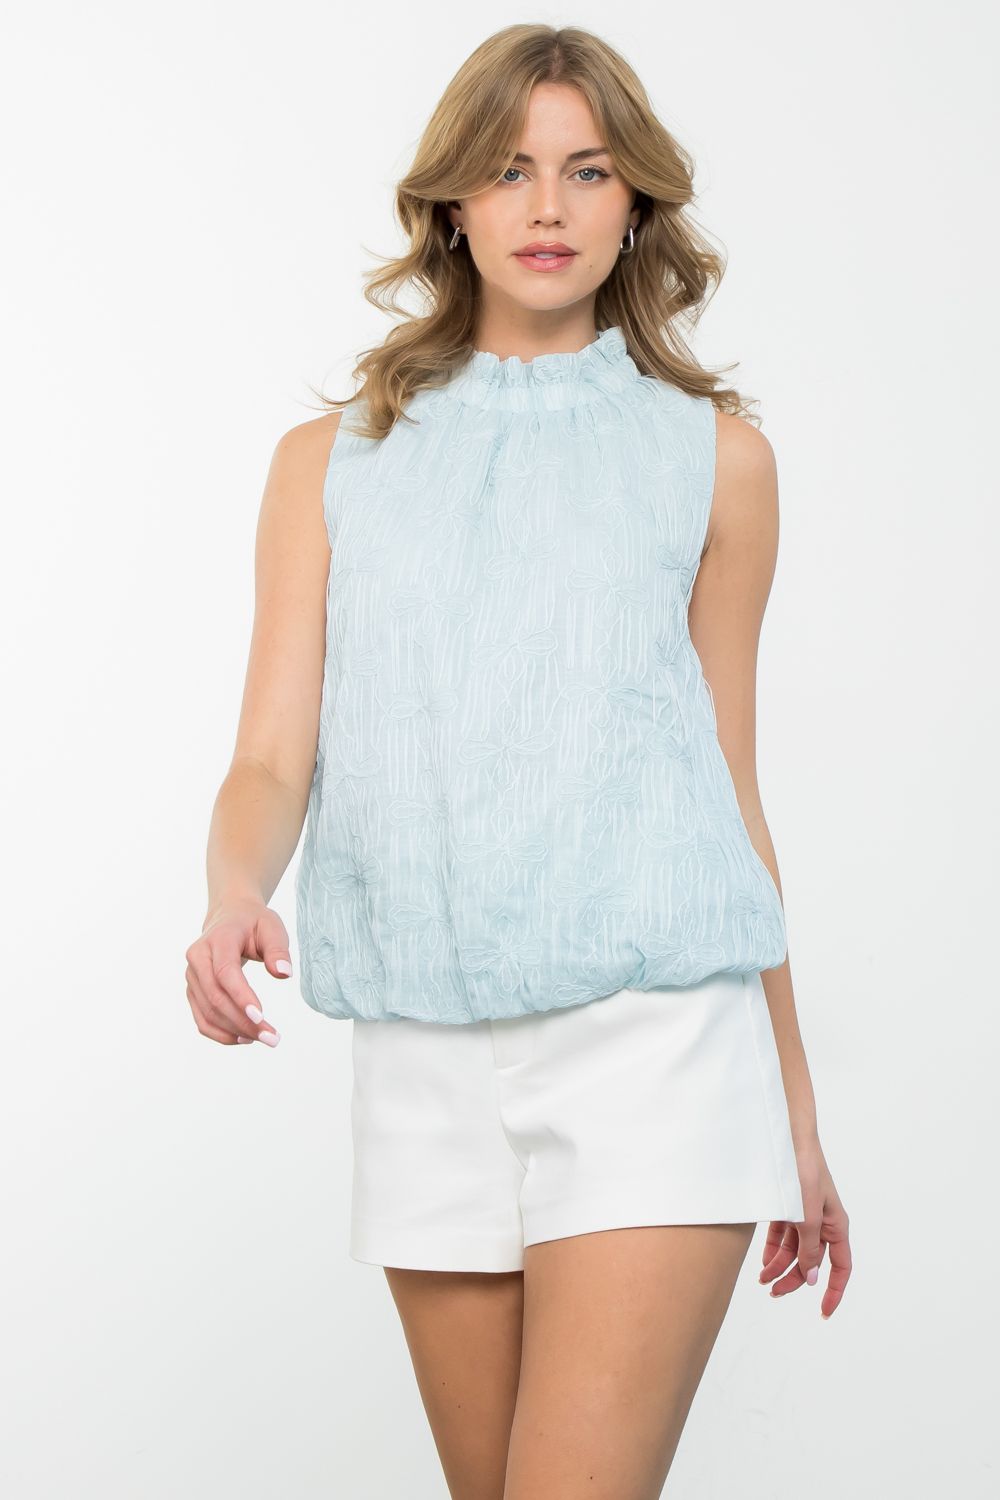 Stand out in style with THML's White Rabbit Textured Flower Top. This sleeveless top boasts a unique textured design and playful flower details, perfect for adding a touch of quirkiness to any outfit. Embrace your fun side with this must-have!